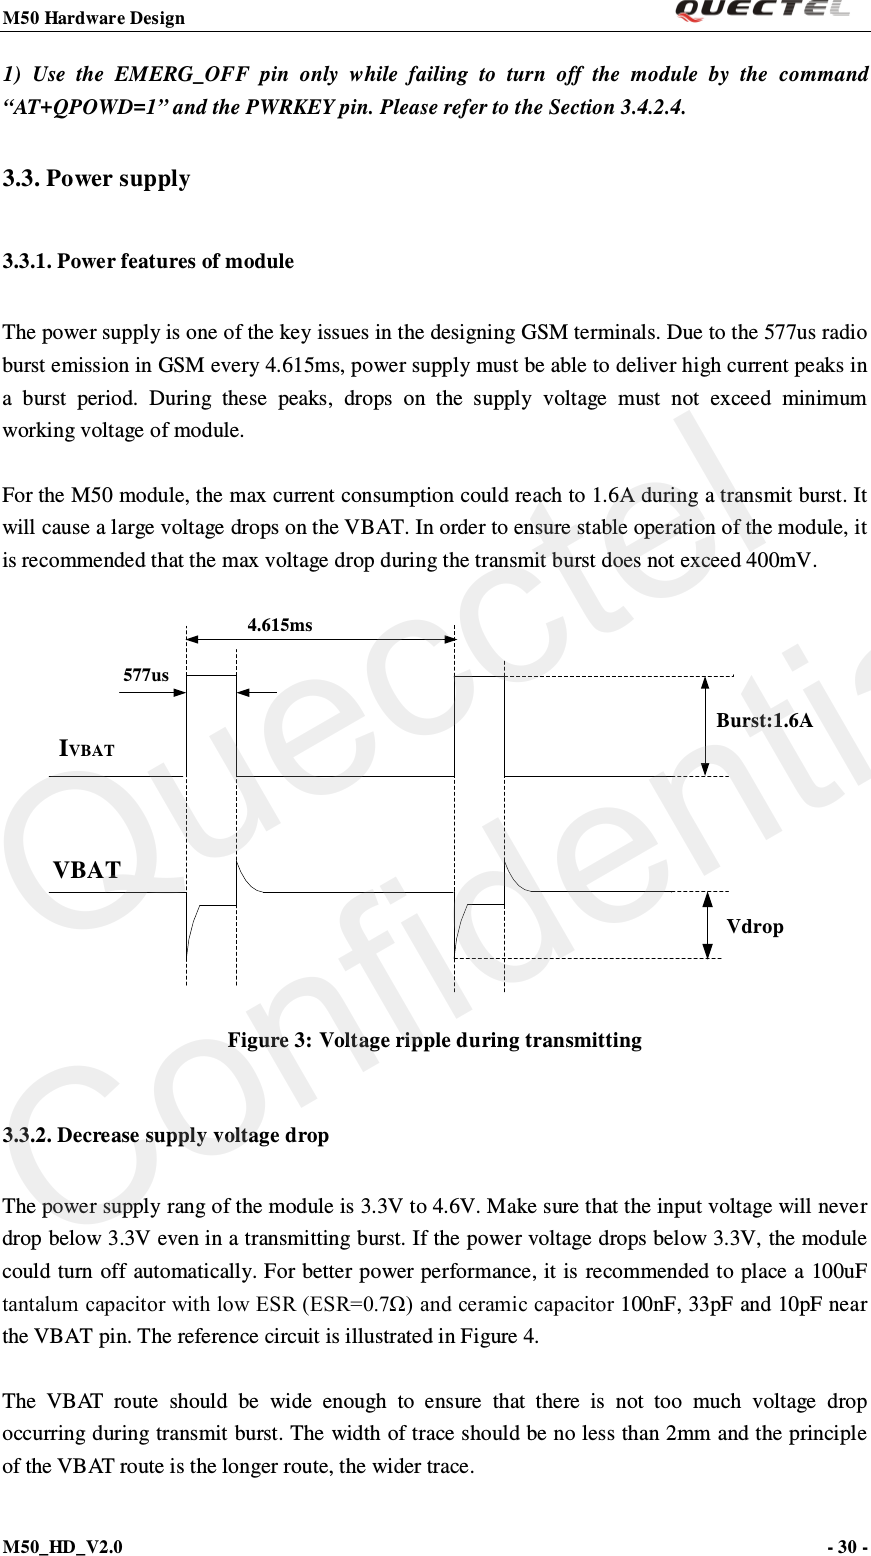 M50 Hardware Design                                                                M50_HD_V2.0                                                                      - 30 -   1)  Use the EMERG_OFF pin  only  while failing to turn off the module by the command “AT+QPOWD=1” and the PWRKEY pin. Please refer to the Section 3.4.2.4. 3.3. Power supply   3.3.1. Power features of module The power supply is one of the key issues in the designing GSM terminals. Due to the 577us radio burst emission in GSM every 4.615ms, power supply must be able to deliver high current peaks in a  burst period. During these peaks,  drops on the supply voltage must not exceed minimum working voltage of module.  For the M50 module, the max current consumption could reach to 1.6A during a transmit burst. It will cause a large voltage drops on the VBAT. In order to ensure stable operation of the module, it is recommended that the max voltage drop during the transmit burst does not exceed 400mV.  Vdrop4.615ms577usIVBATVBATBurst:1.6A Figure 3: Voltage ripple during transmitting 3.3.2. Decrease supply voltage drop The power supply rang of the module is 3.3V to 4.6V. Make sure that the input voltage will never drop below 3.3V even in a transmitting burst. If the power voltage drops below 3.3V, the module could turn off automatically. For better power performance, it is recommended to place a 100uF tantalum capacitor with low ESR (ESR=0.7Ω) and ceramic capacitor 100nF, 33pF and 10pF near the VBAT pin. The reference circuit is illustrated in Figure 4.  The  V B AT  r o u t e  should be wide enough to ensure that there is not too much voltage drop occurring during transmit burst. The width of trace should be no less than 2mm and the principle of the VBAT route is the longer route, the wider trace.  Quecctel Confidential